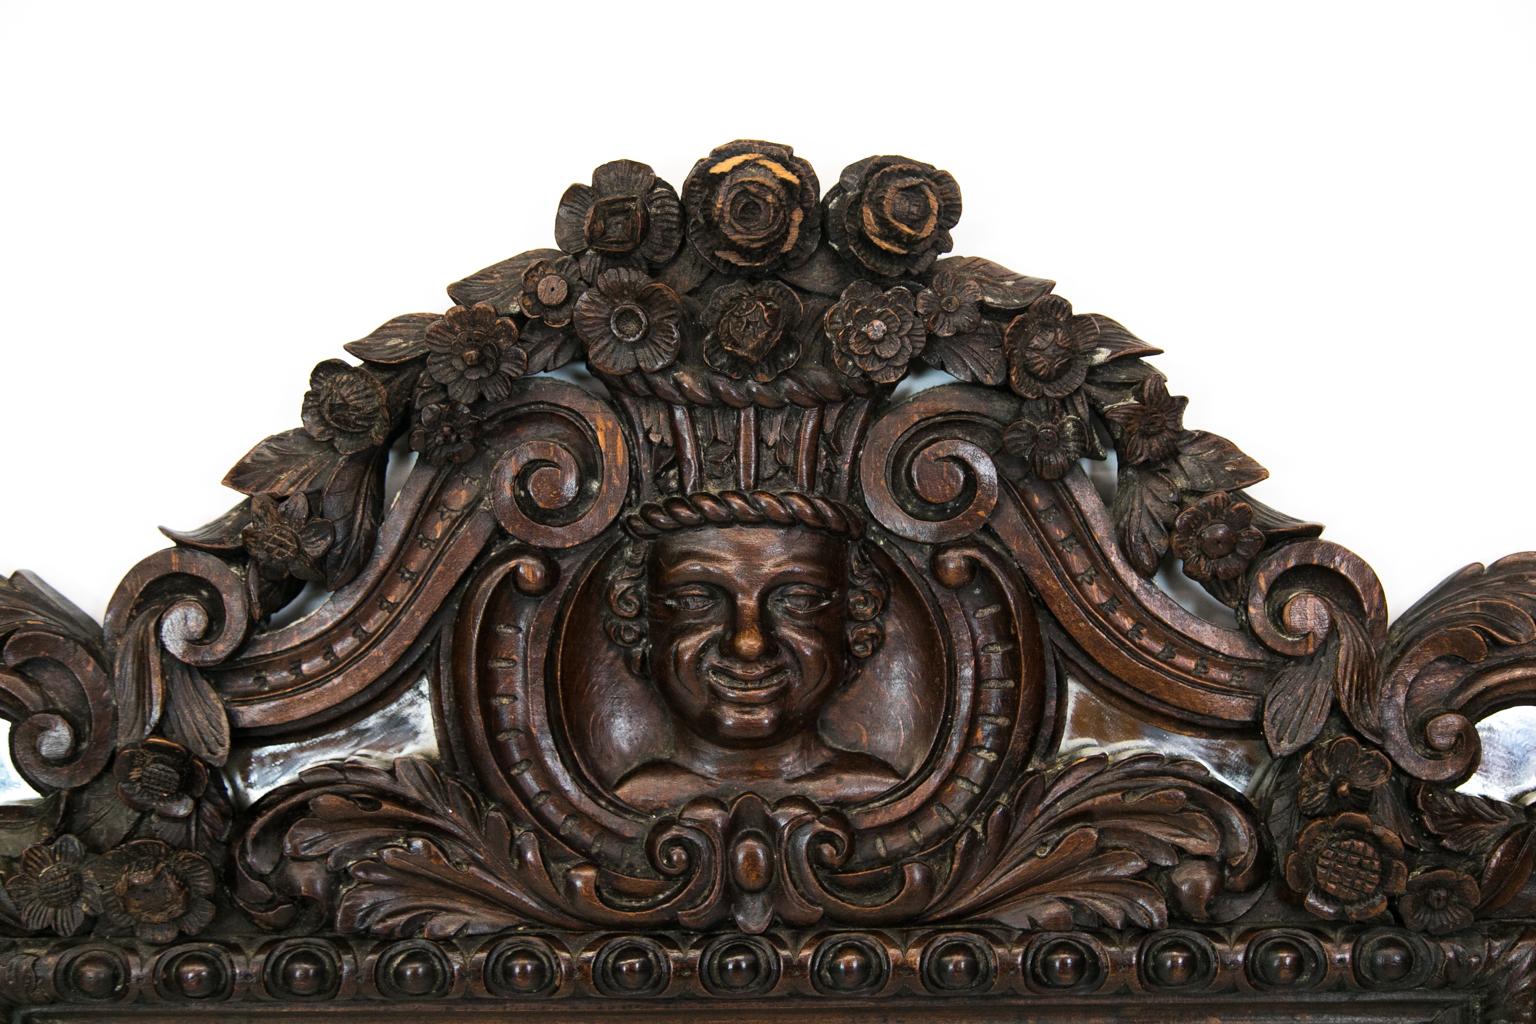 Carved English mirror, is carved with raised flowers and arabesques. The center cartouche has a carved mask.